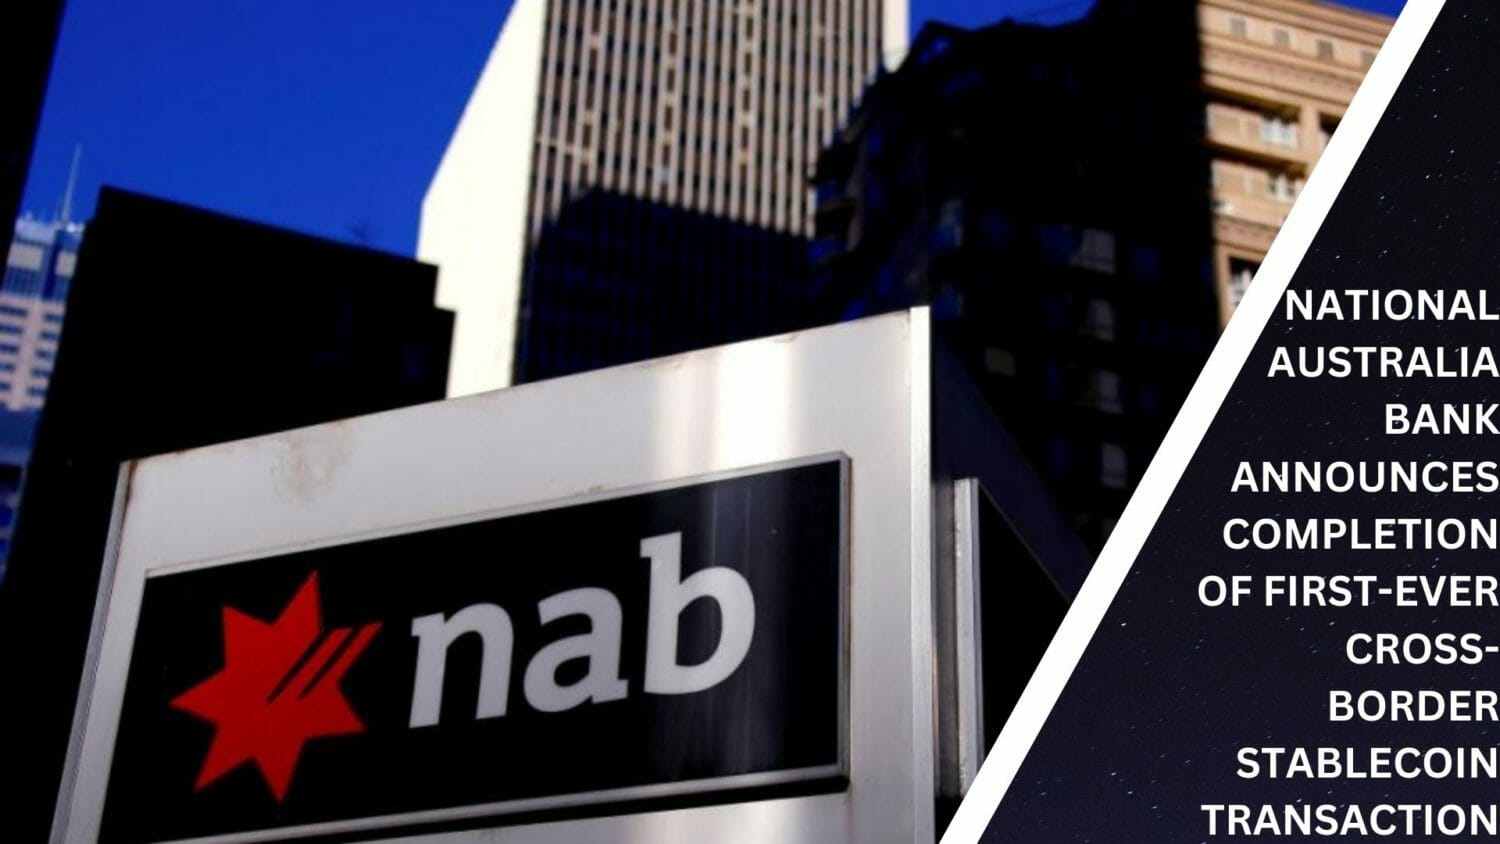 National Australia Bank Announces Completion Of First-Ever Cross-Border Stablecoin Transaction